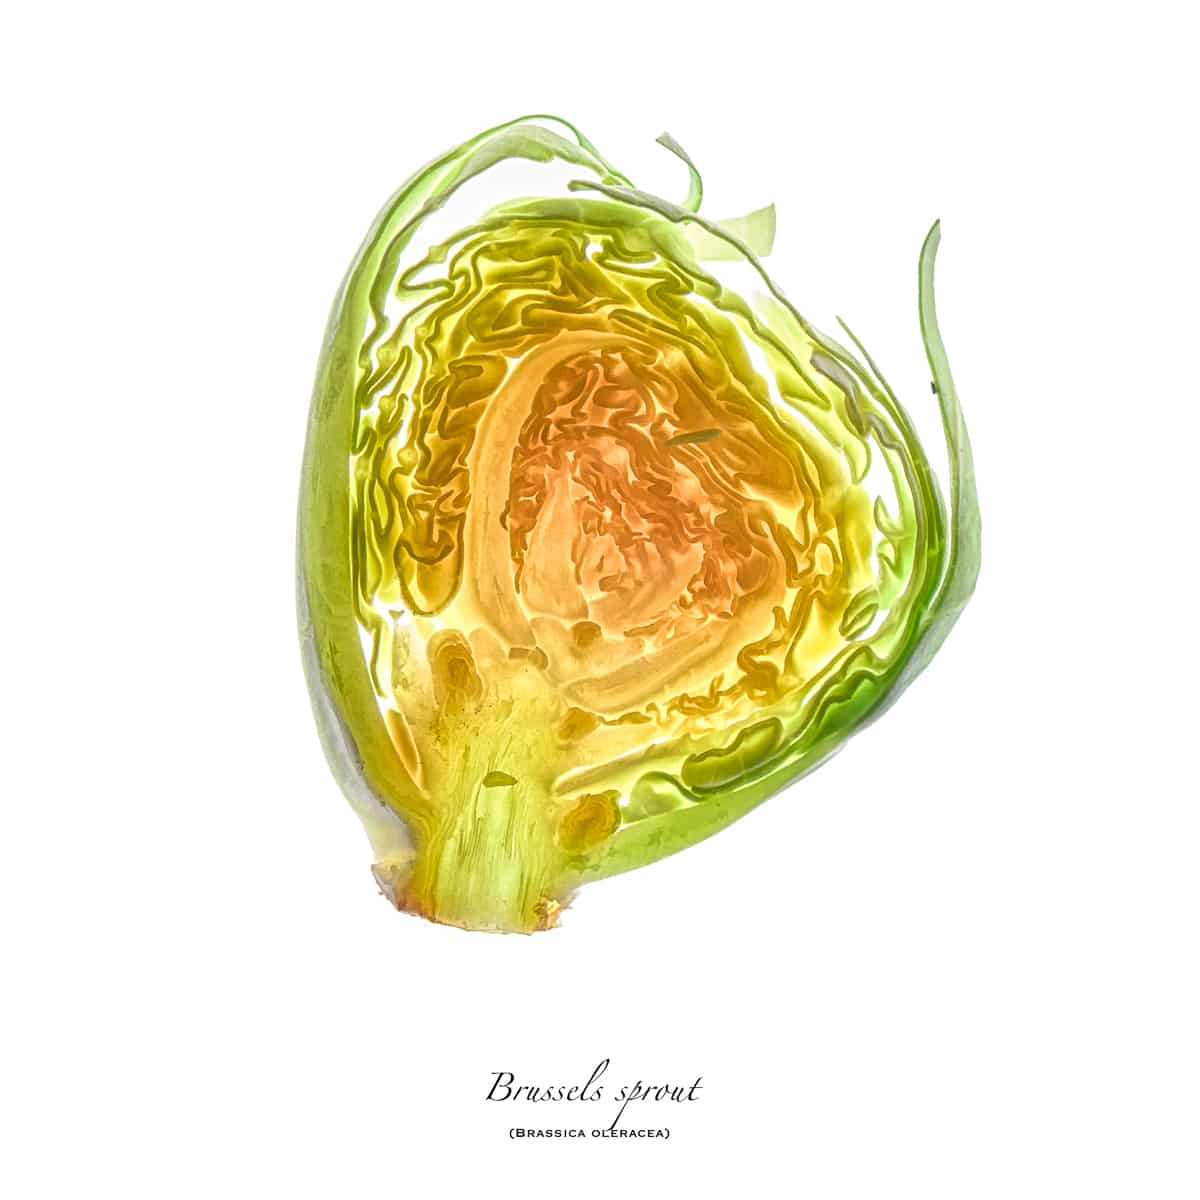 Light shines through this slice of a Brussels Sprout (Brassica oleracea) on a white background.